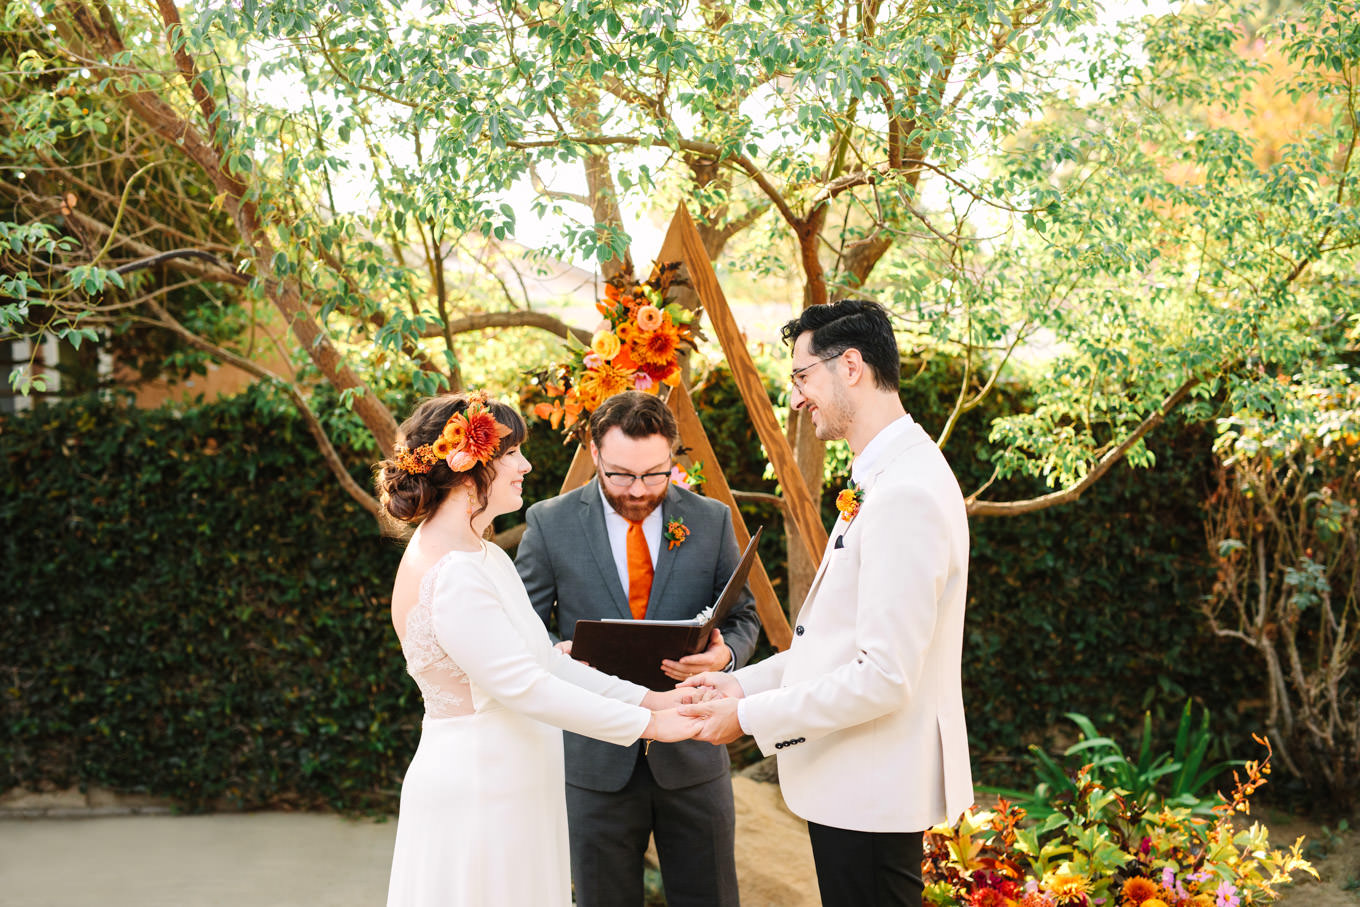 Bride and groom in front of unique backdrop | Vibrant backyard micro wedding featured on Green Wedding Shoes | Colorful LA wedding photography | #losangeleswedding #backyardwedding #microwedding #laweddingphotographer Source: Mary Costa Photography | Los Angeles